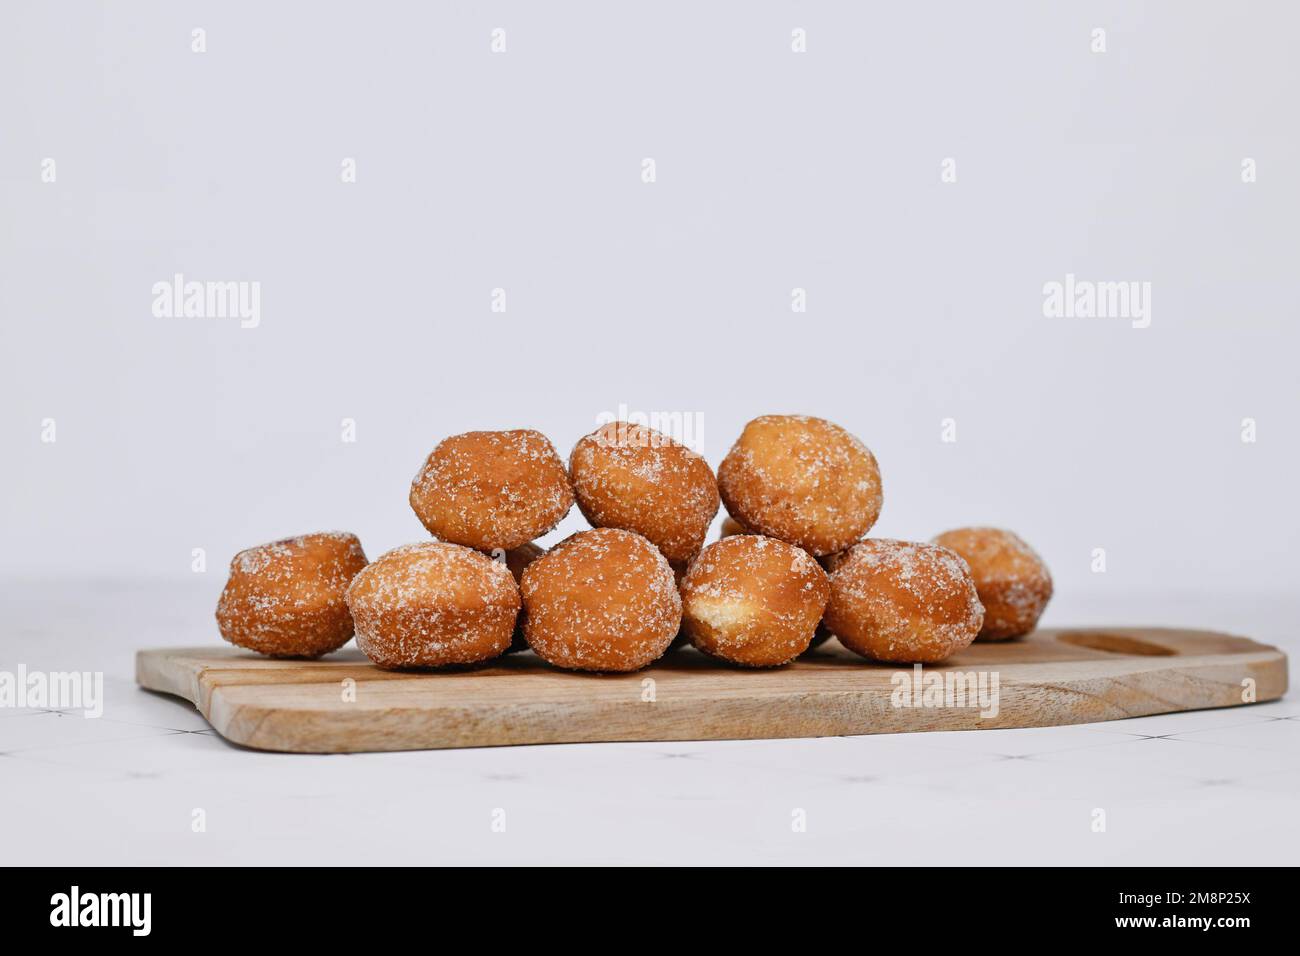 German traditional 'Berliner Pfannkuchen', a donut without hole filled with jam on wooden cutting board Stock Photo